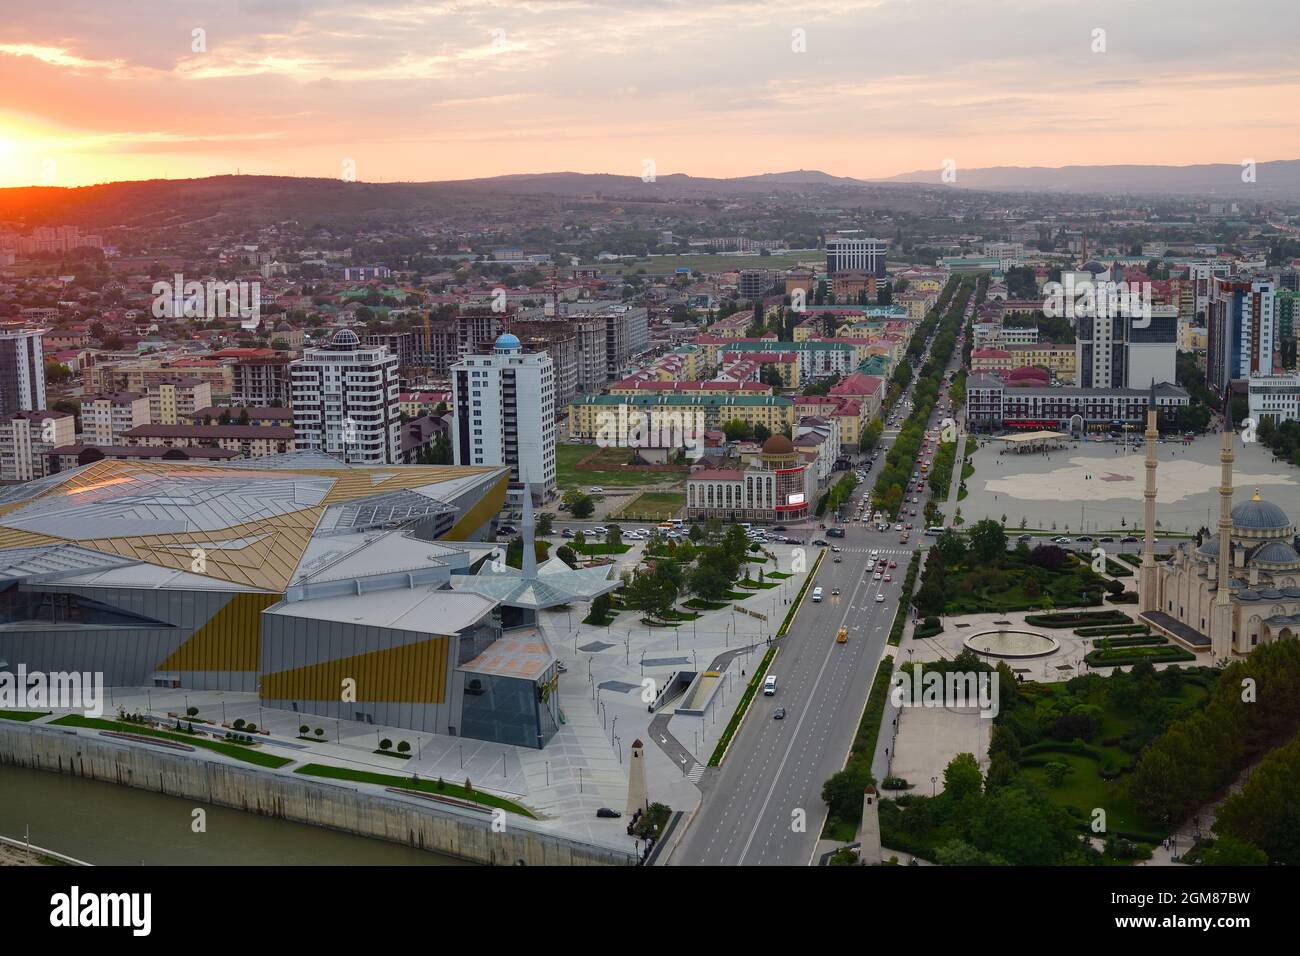 Grozny, Chechen, Russia - September 13, 2021: View from the observation deck of the Grozny city at sunset Stock Photo